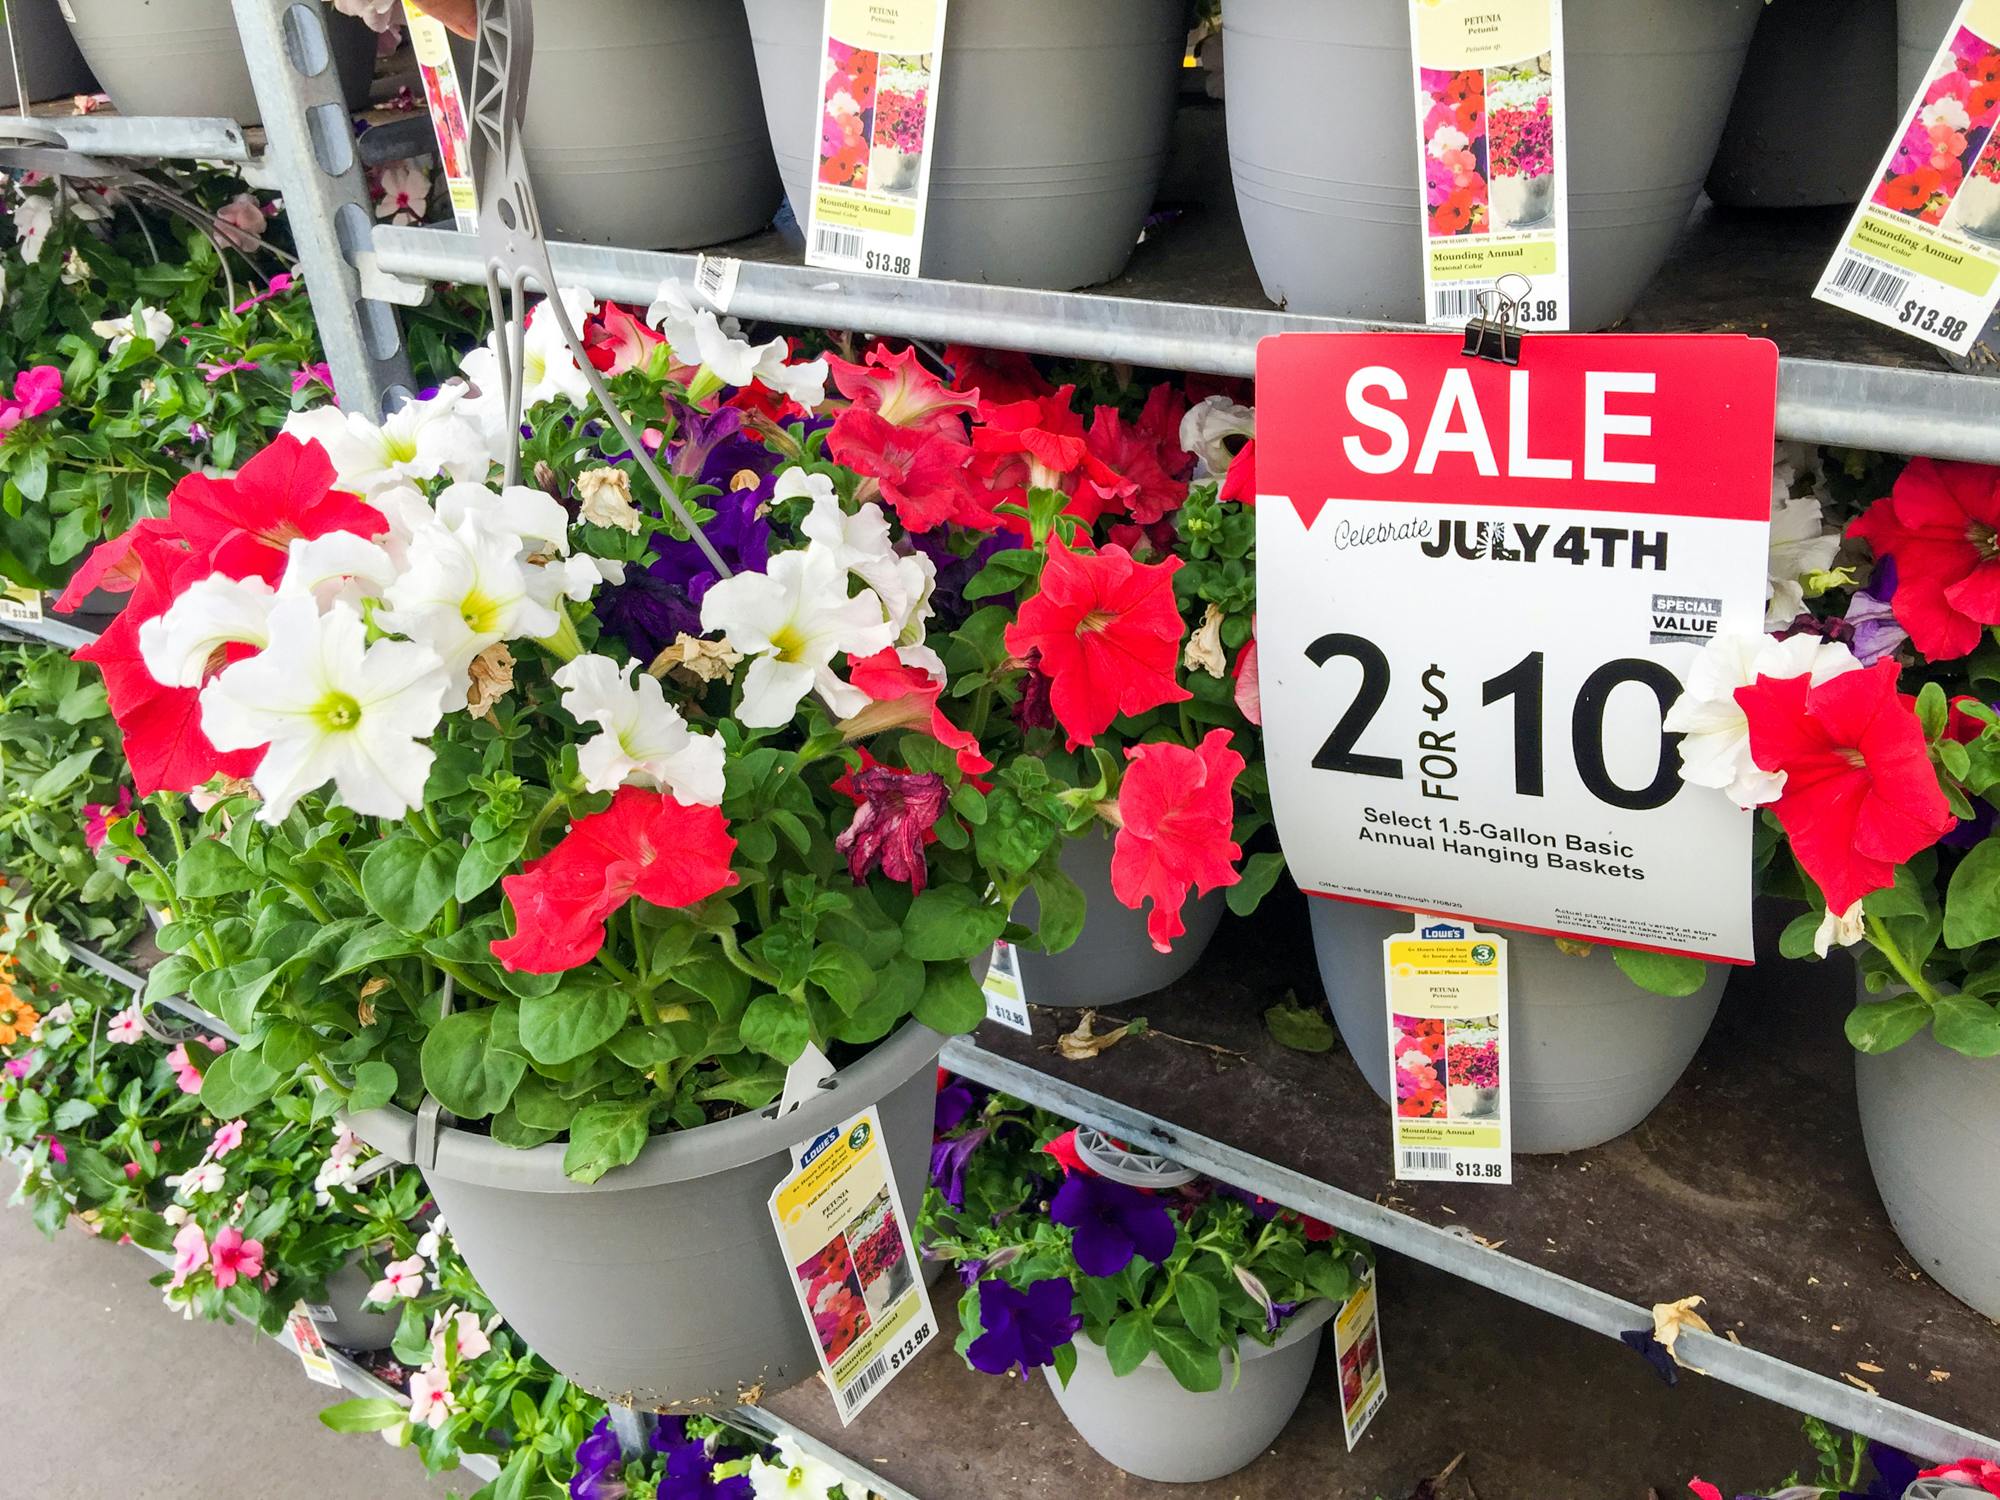 Some hanging flower baskets on sale at Lowe's for their 4th of July sale